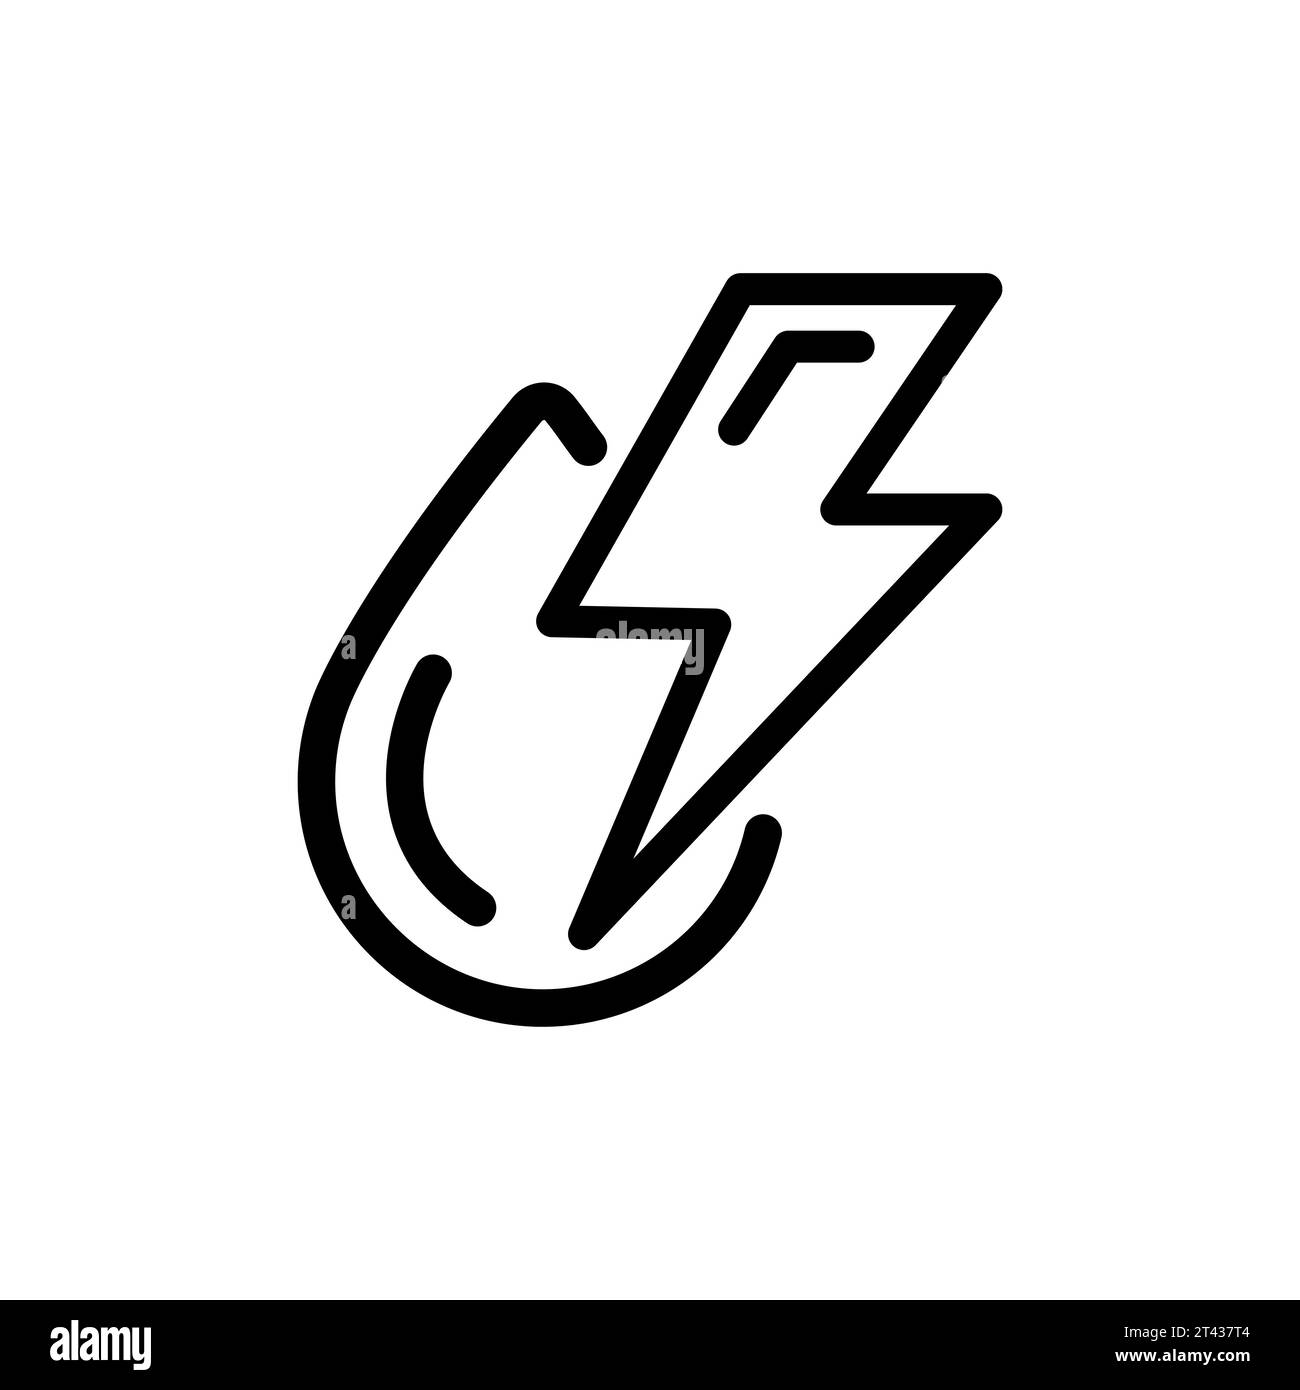 Hydro power icon logo vector illustration. Lightning with water drop symbol template for graphic and web design collection Stock Vector